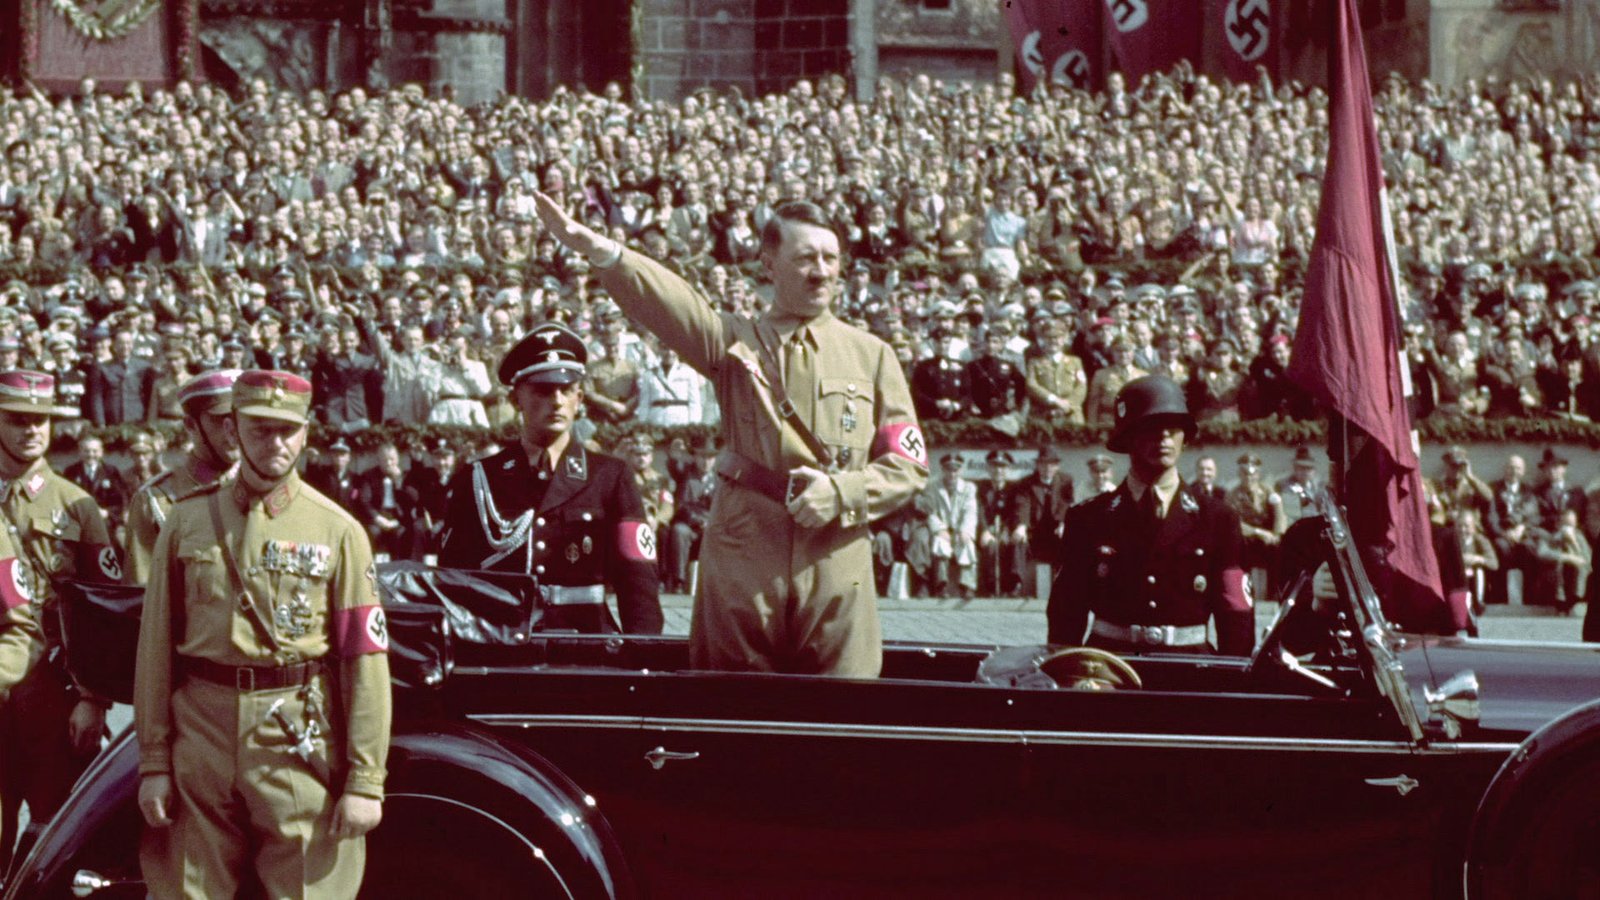 Germany was ruled by Adolf Hitler